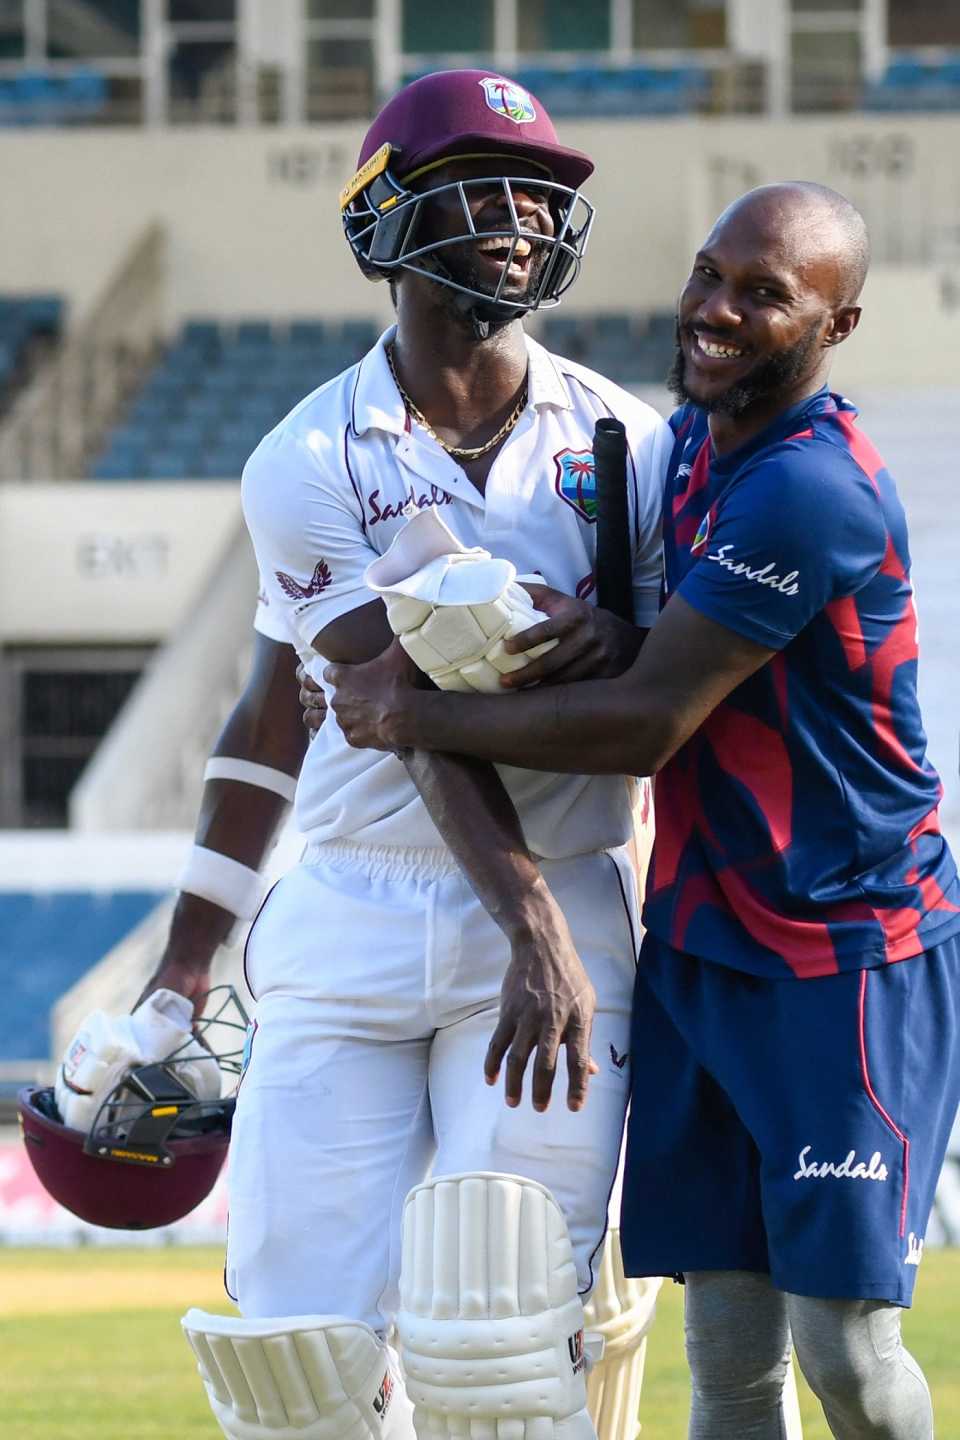 Kemar Roach and Jermaine Blackwood, heroes of West Indies' triumph, enjoy the winning moment, West Indies vs Pakistan, 1st Test, Kingston, 4th day, August 15, 2021